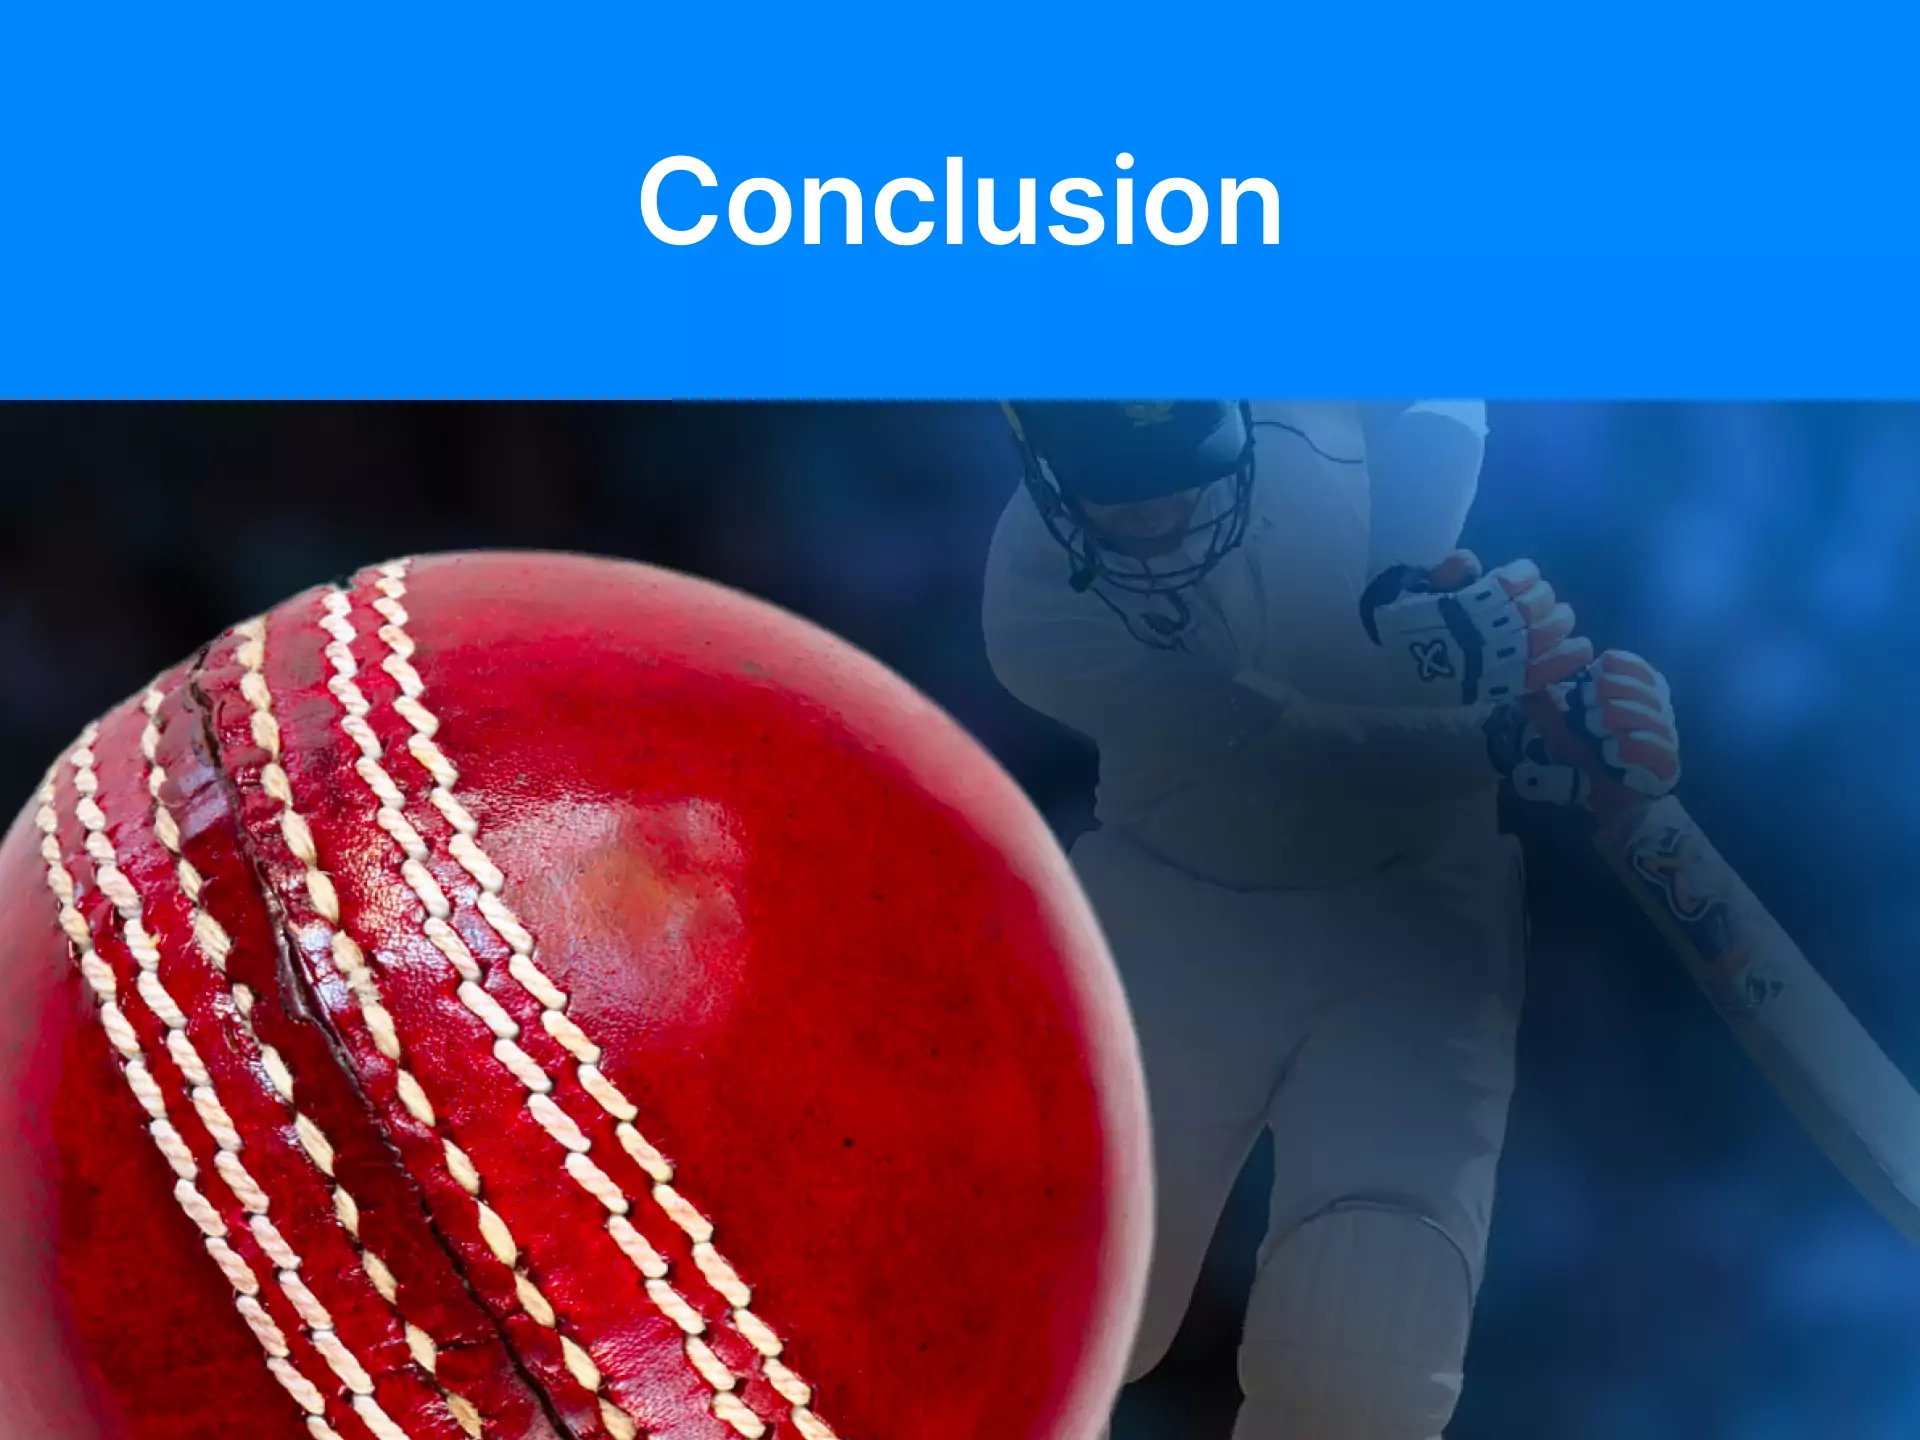 If you want to start betting on cricket, use one of the apps we recommended.